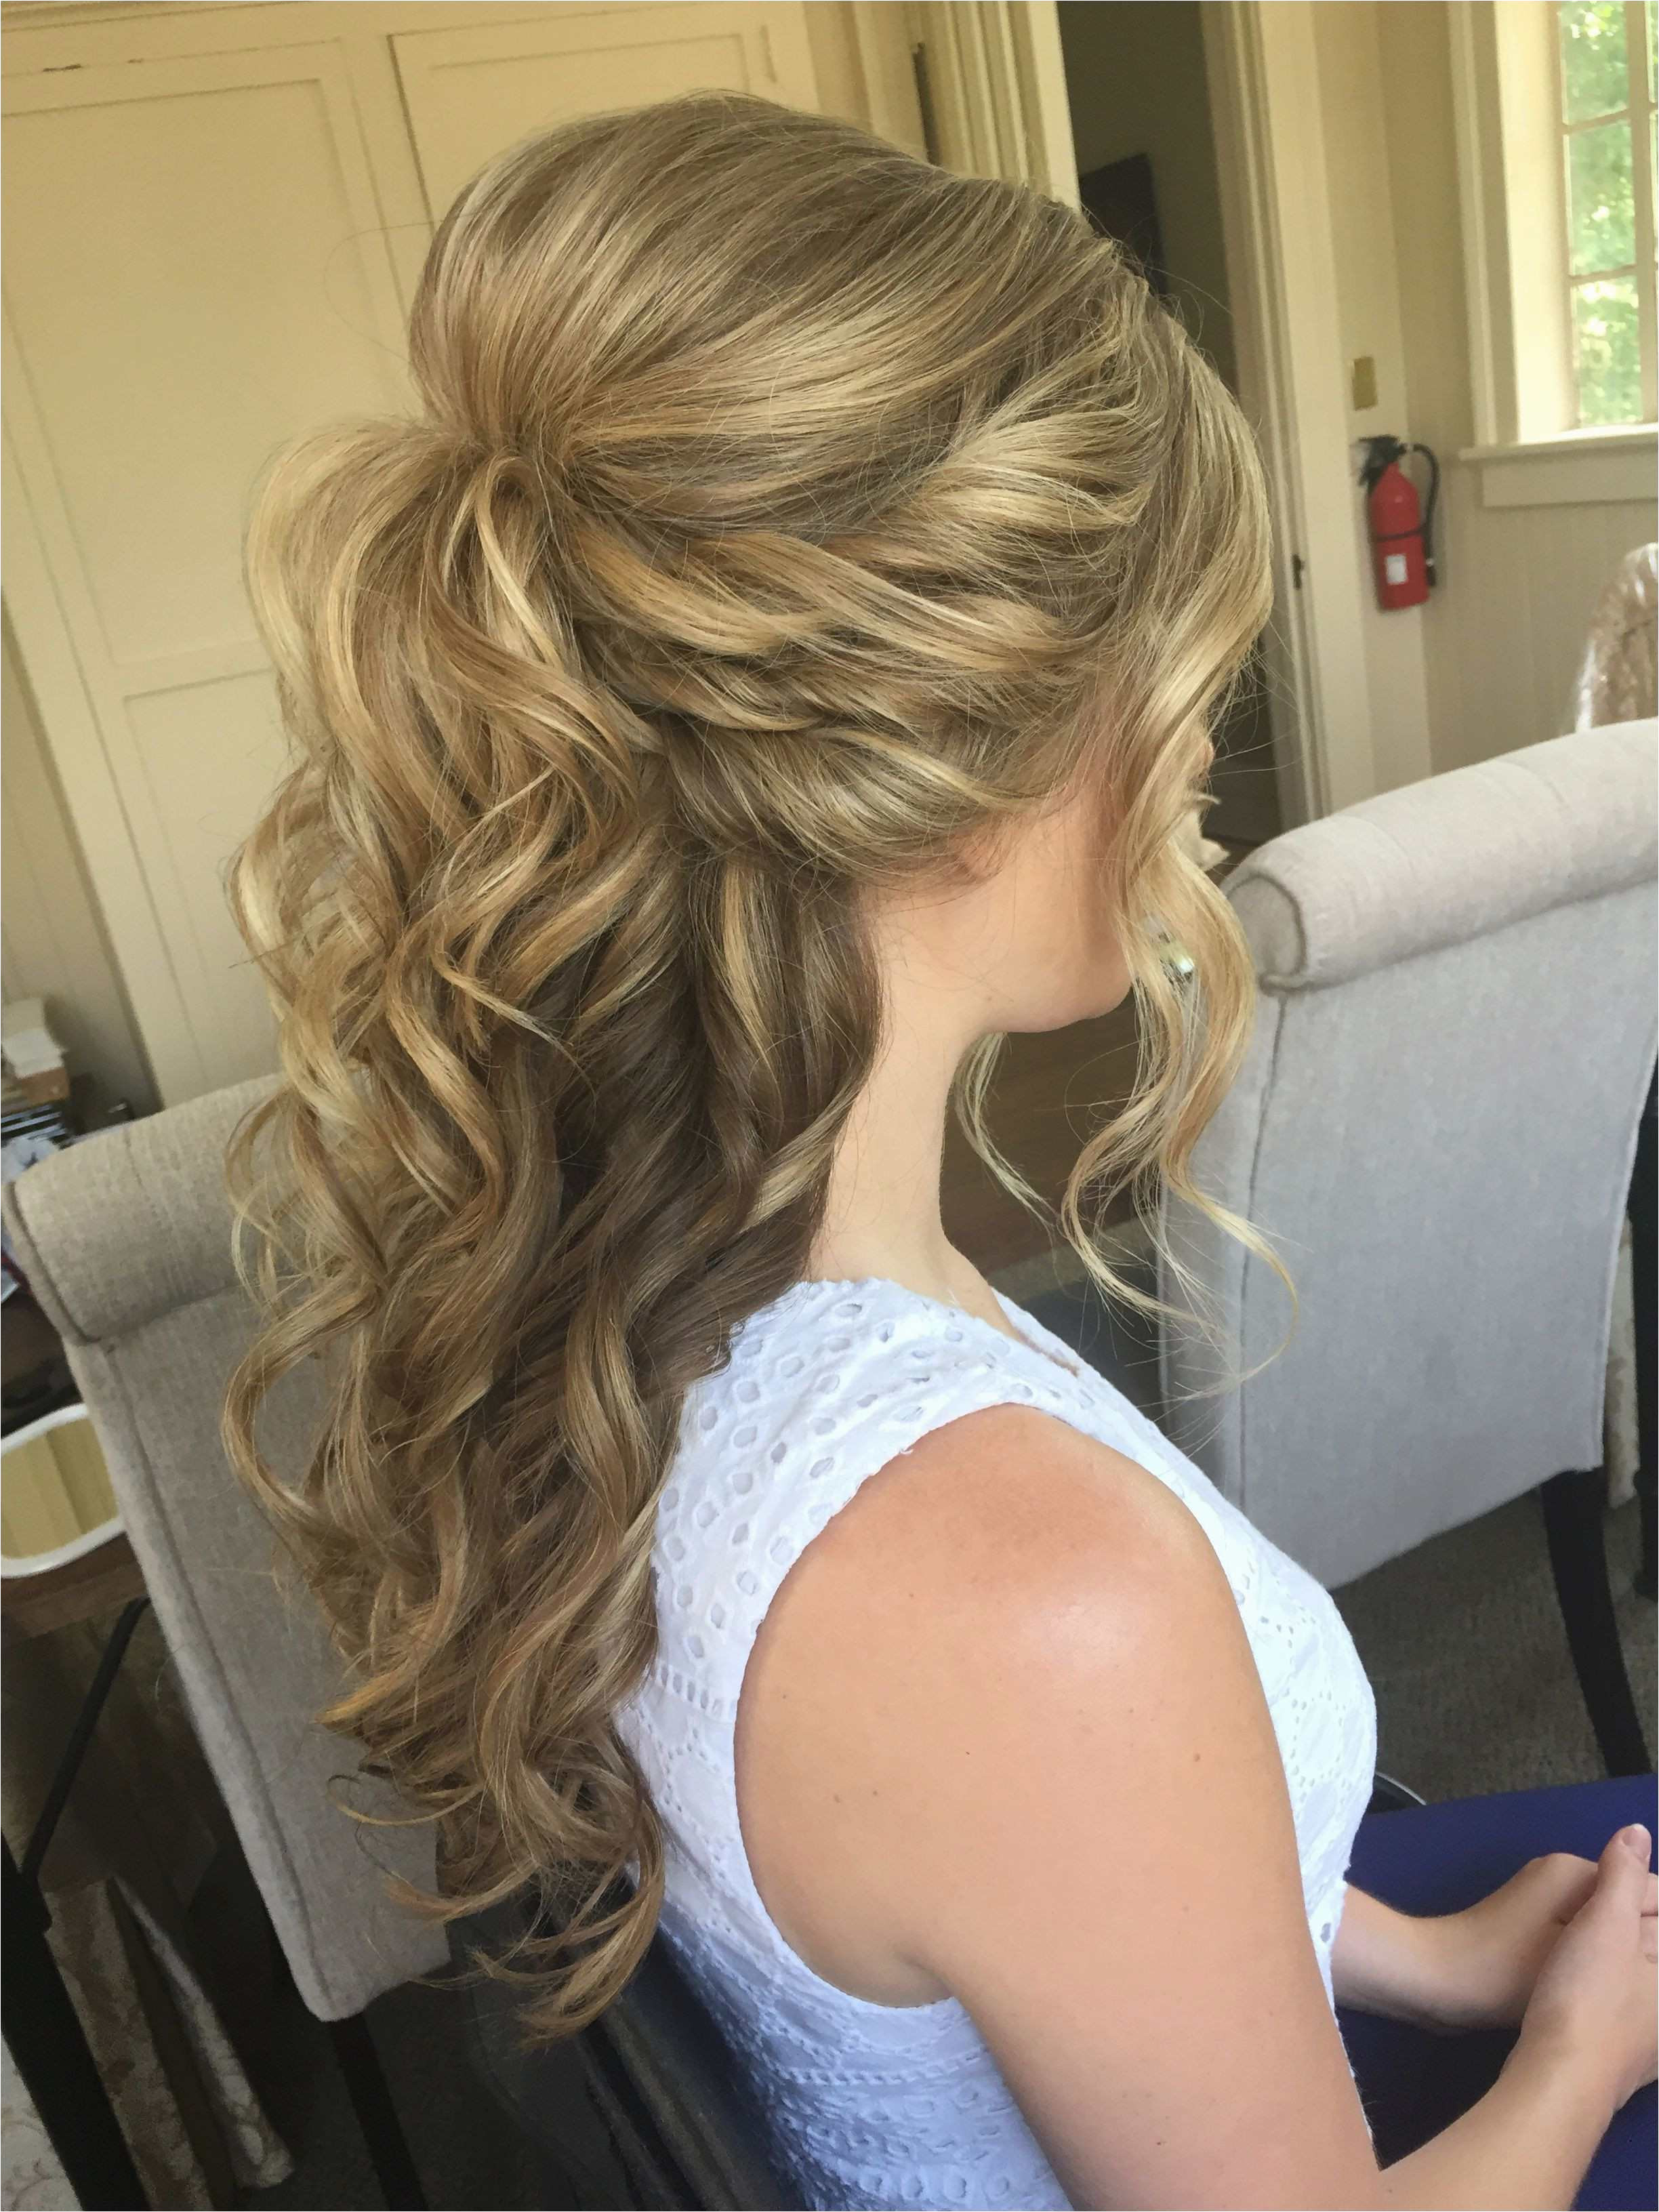 Cool Formal Hairstyles for Medium Hair Half Up Half Down Best Half Up Half Down Hairstyles